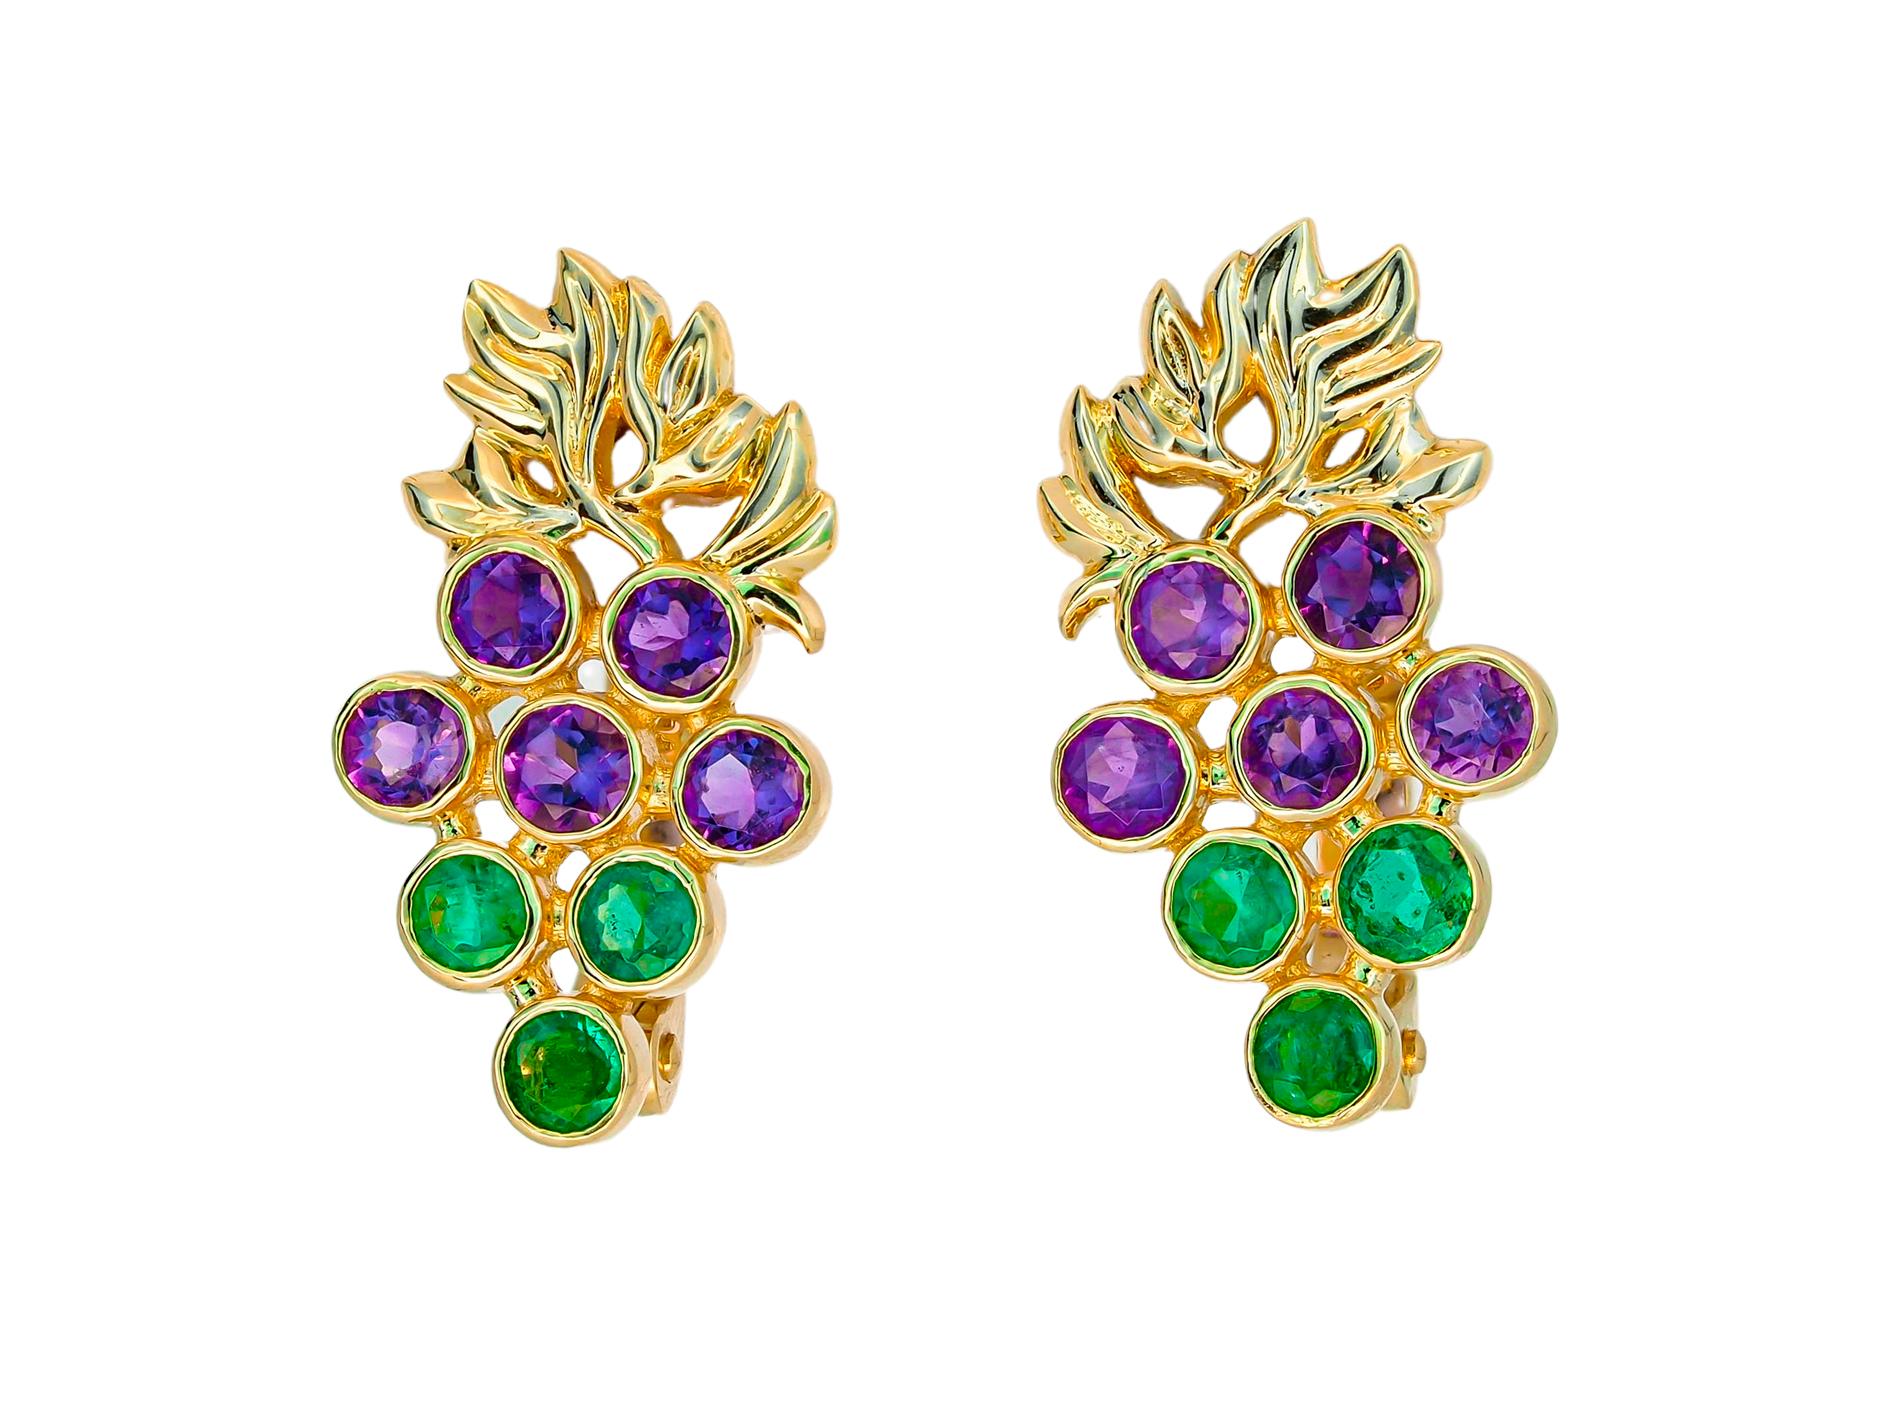 14k Gold Grape Earrings with Emeralds and Amethysts For Sale 12